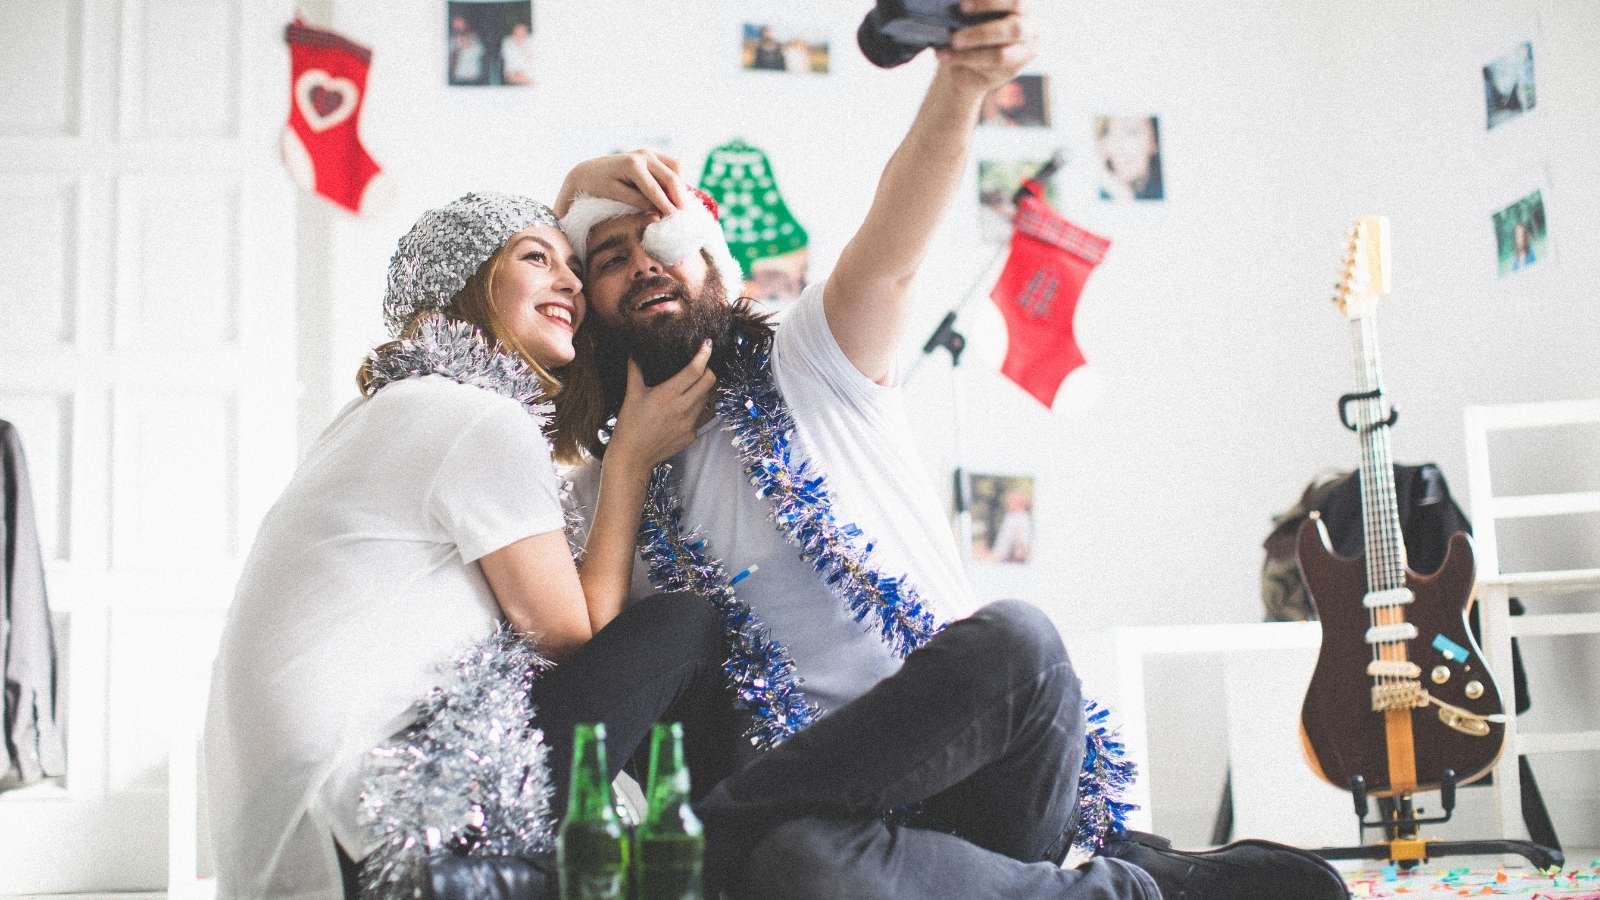 How to leverage user generated content this Christmas